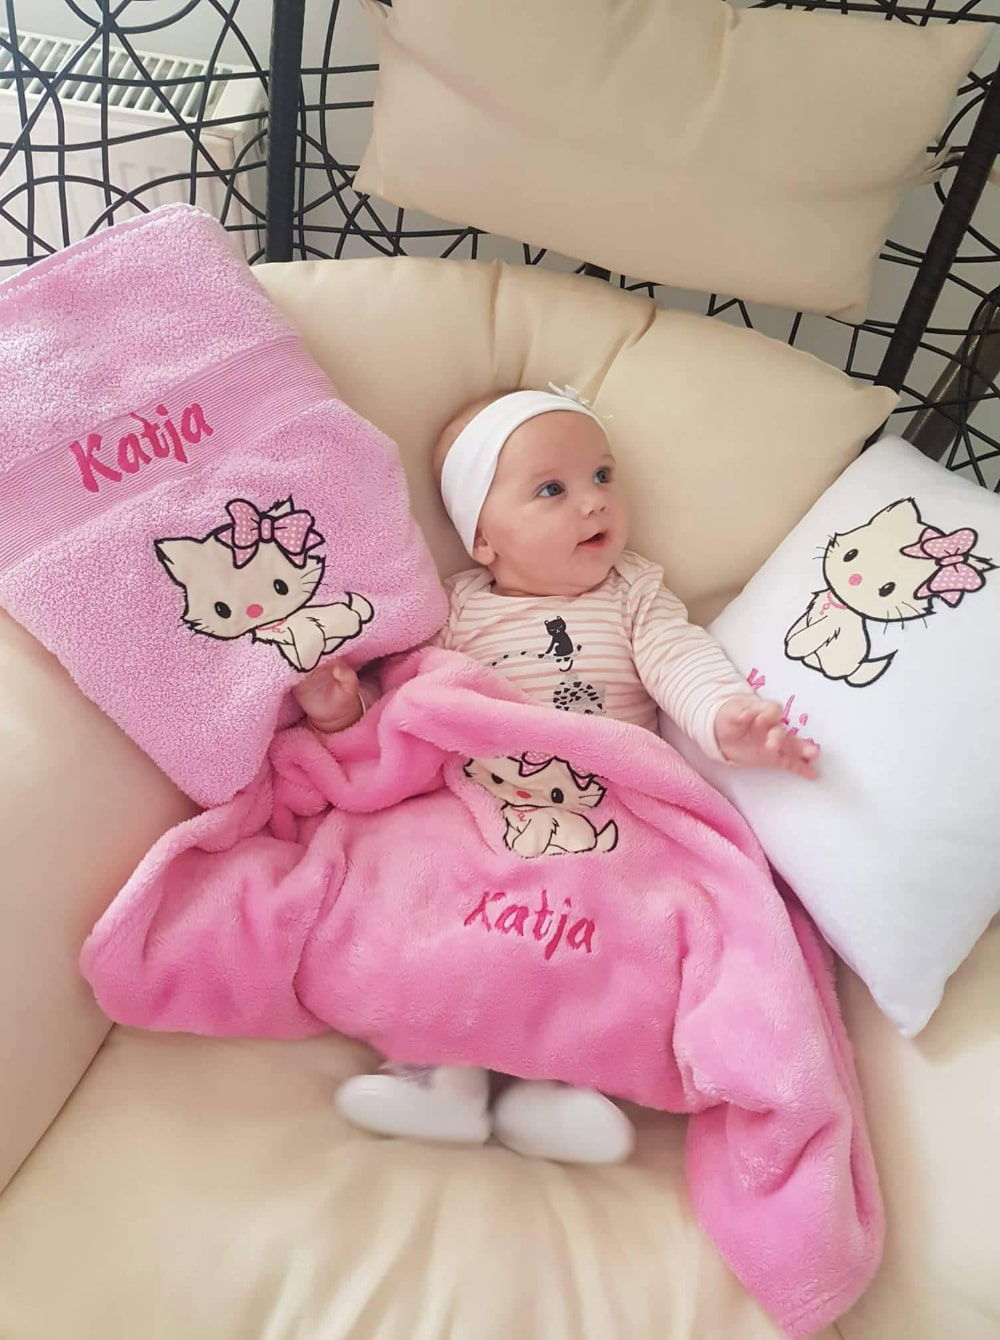 Adorable baby girl is enjoying her personalized set consisting of a pillow, blanket, and towel, all customized with her name.